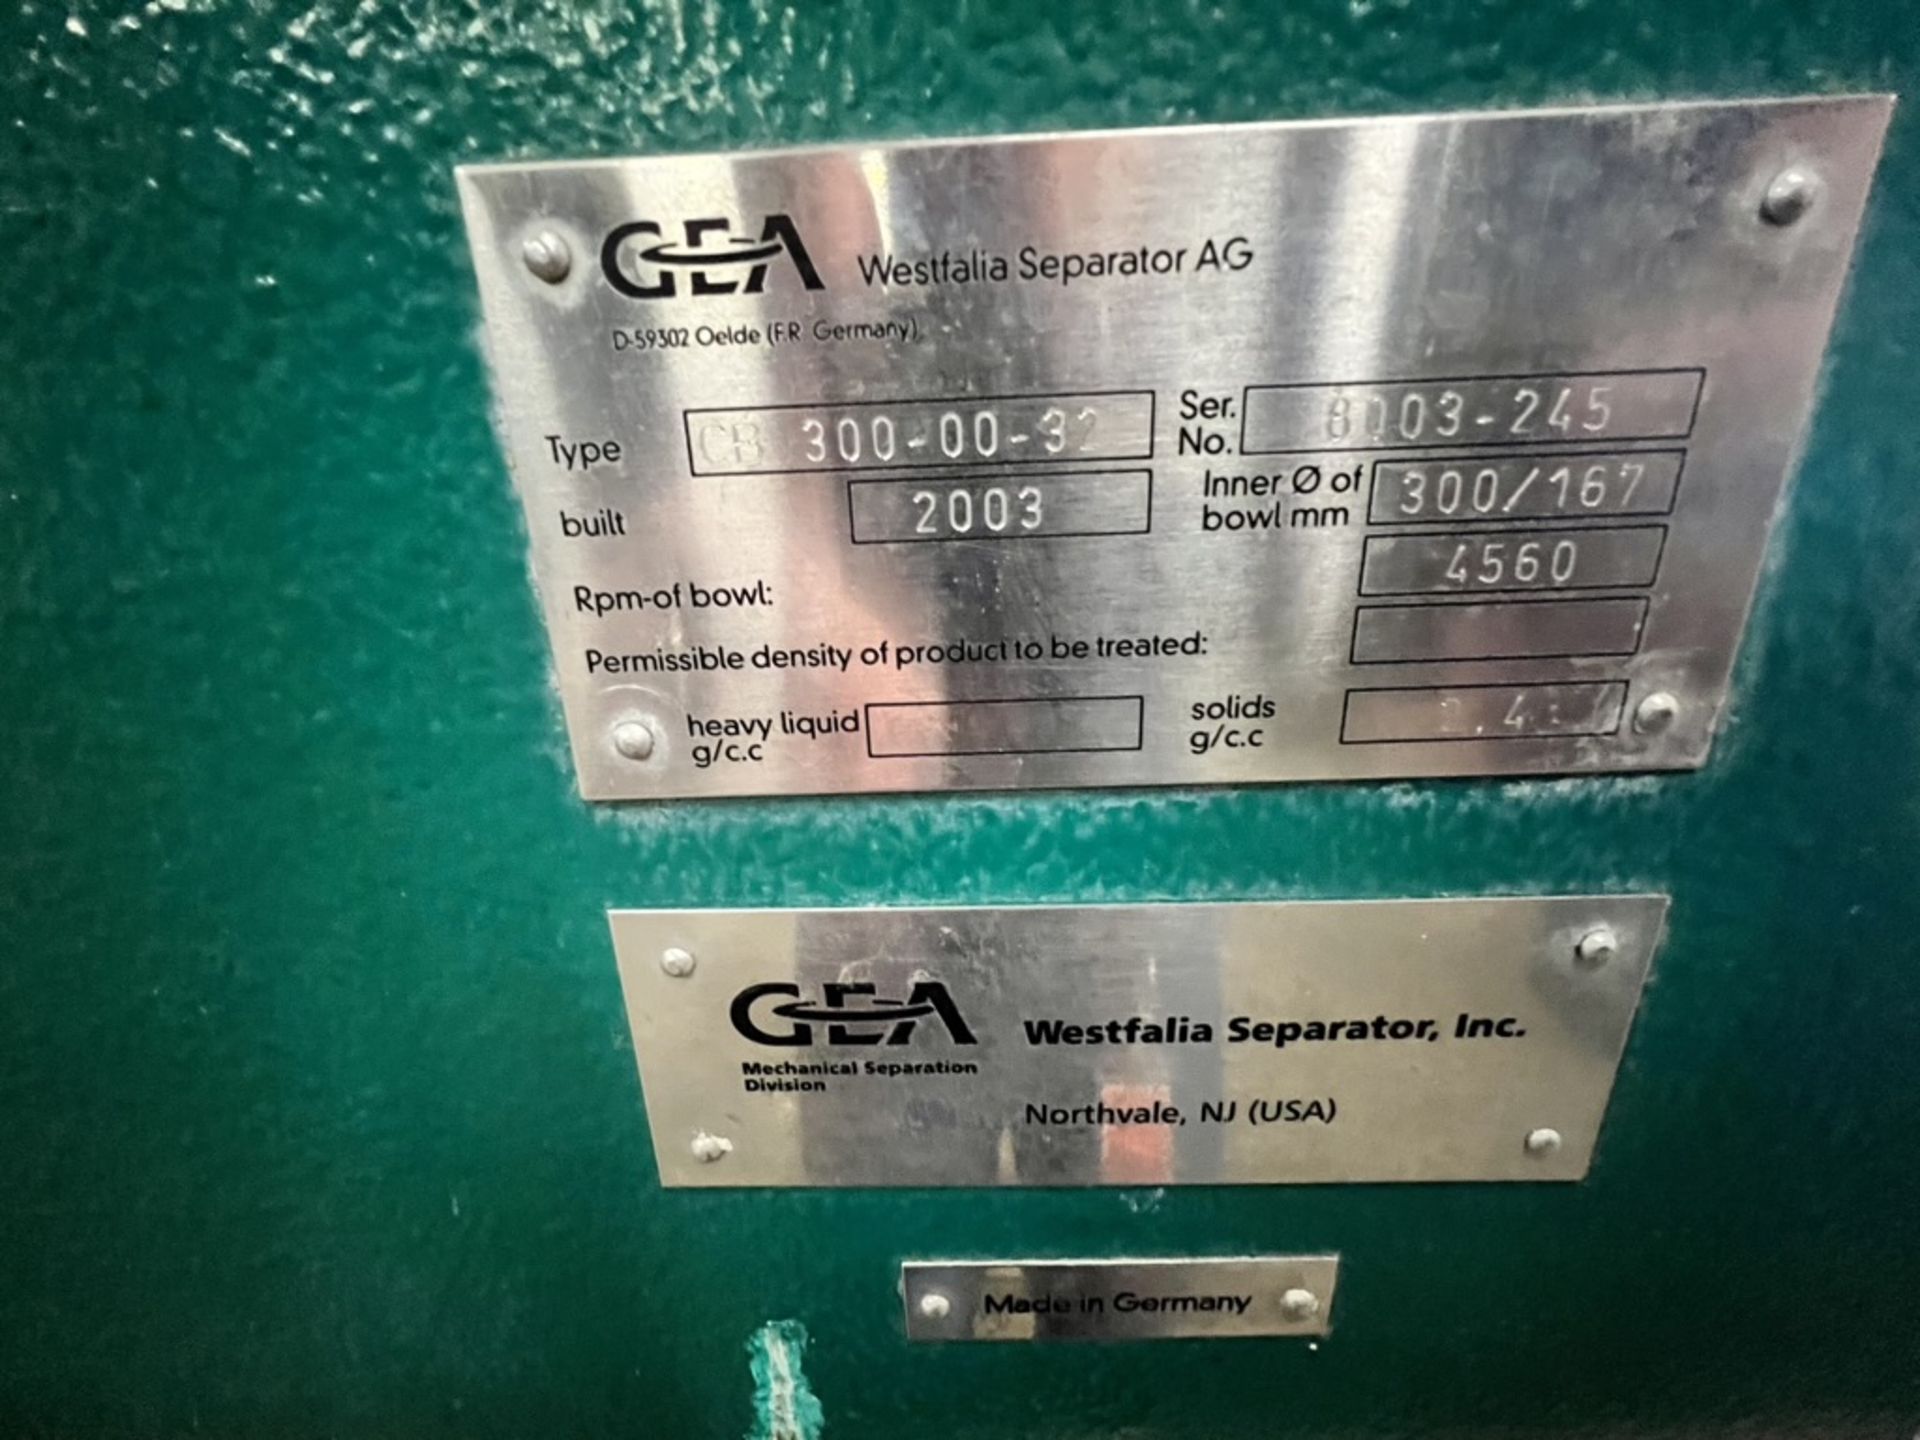 GEA WESTFALIA CENTRIFUGAL DECANTER, MODEL CB 300-00-32, S/N 8003-245, INCLUDES S/S CONTROL PANEL - Image 4 of 11